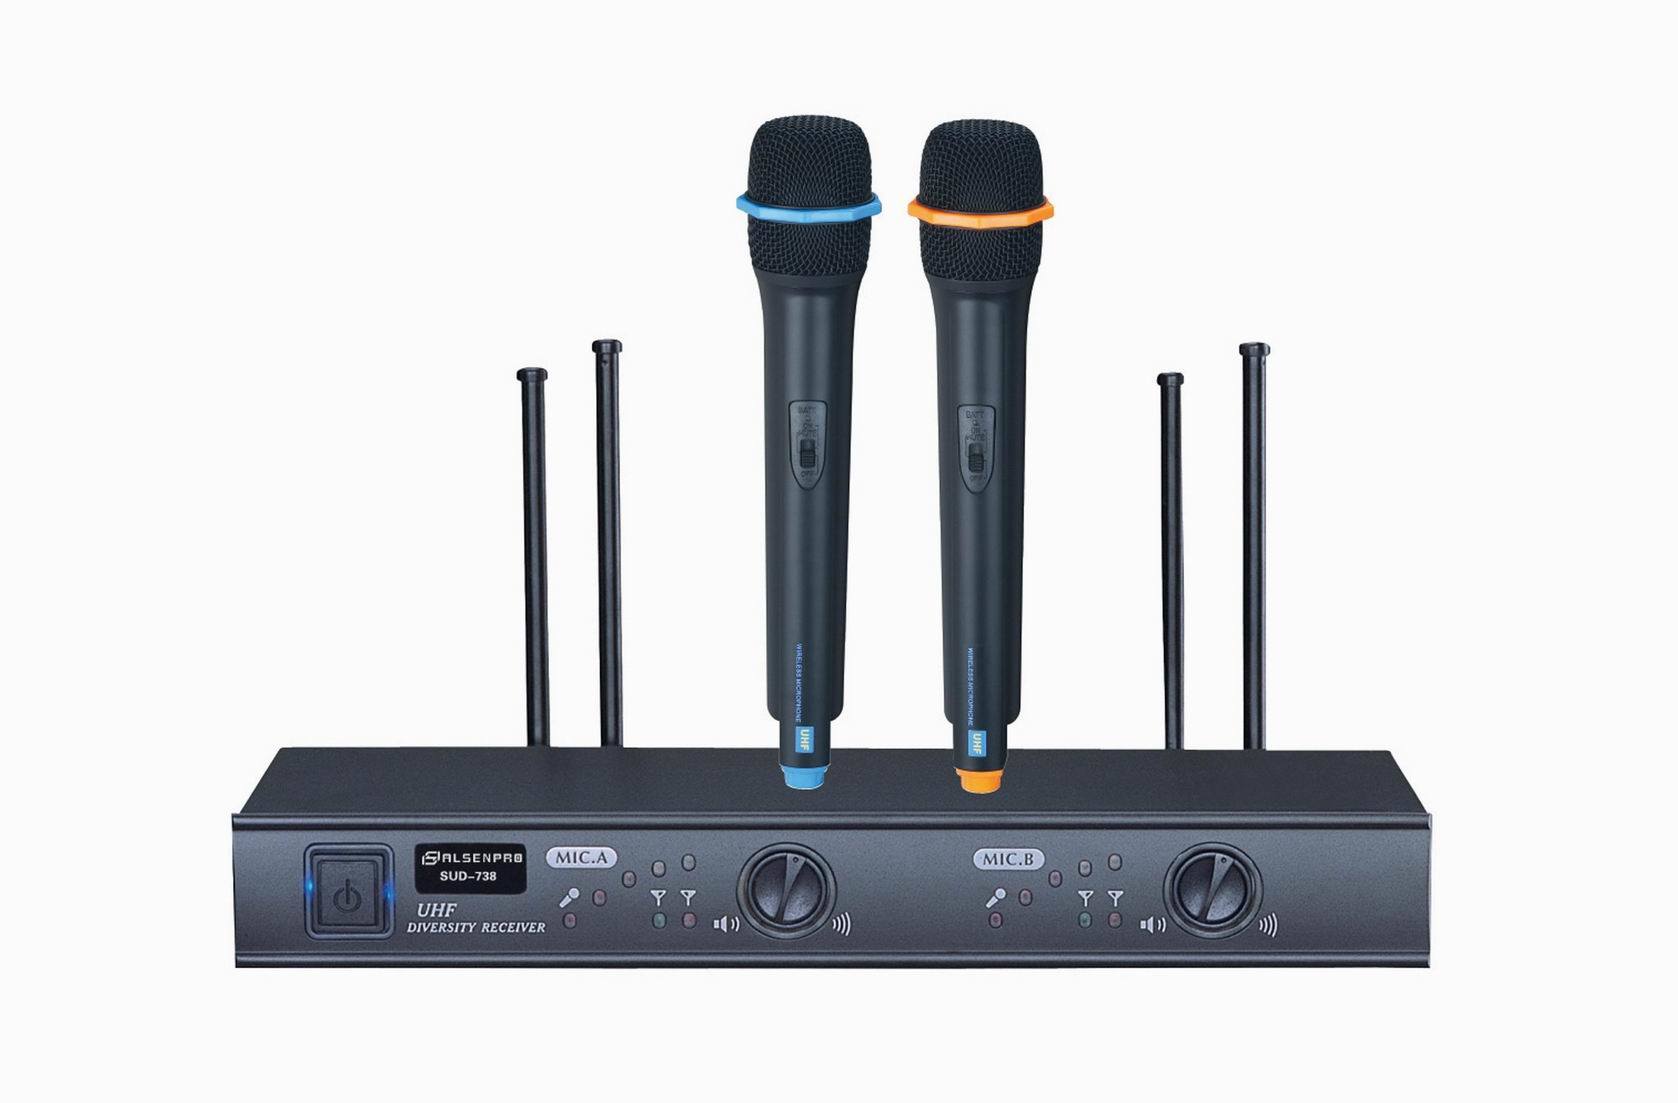 Sud-738 Good Quality Wireless Microphone System